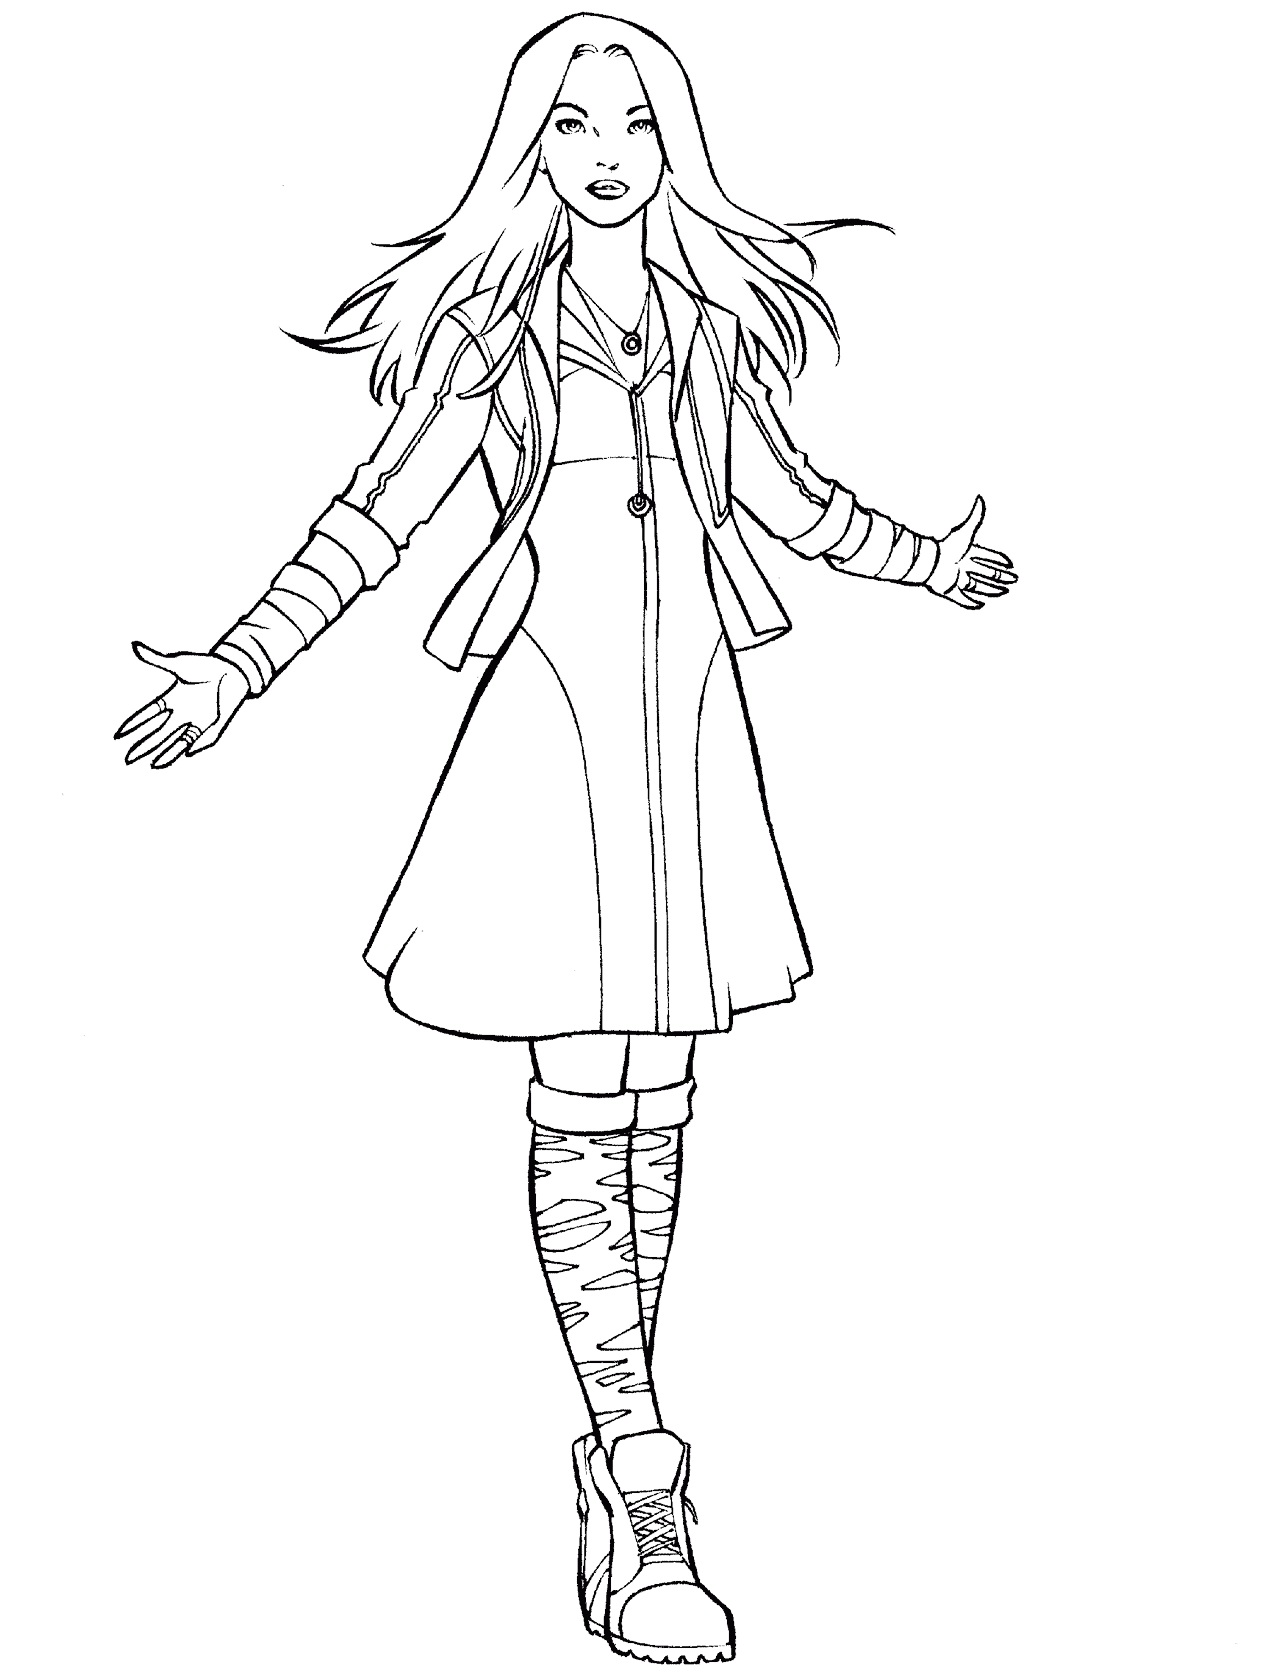 Scarlet Witch Avengers 2 Coloring Page